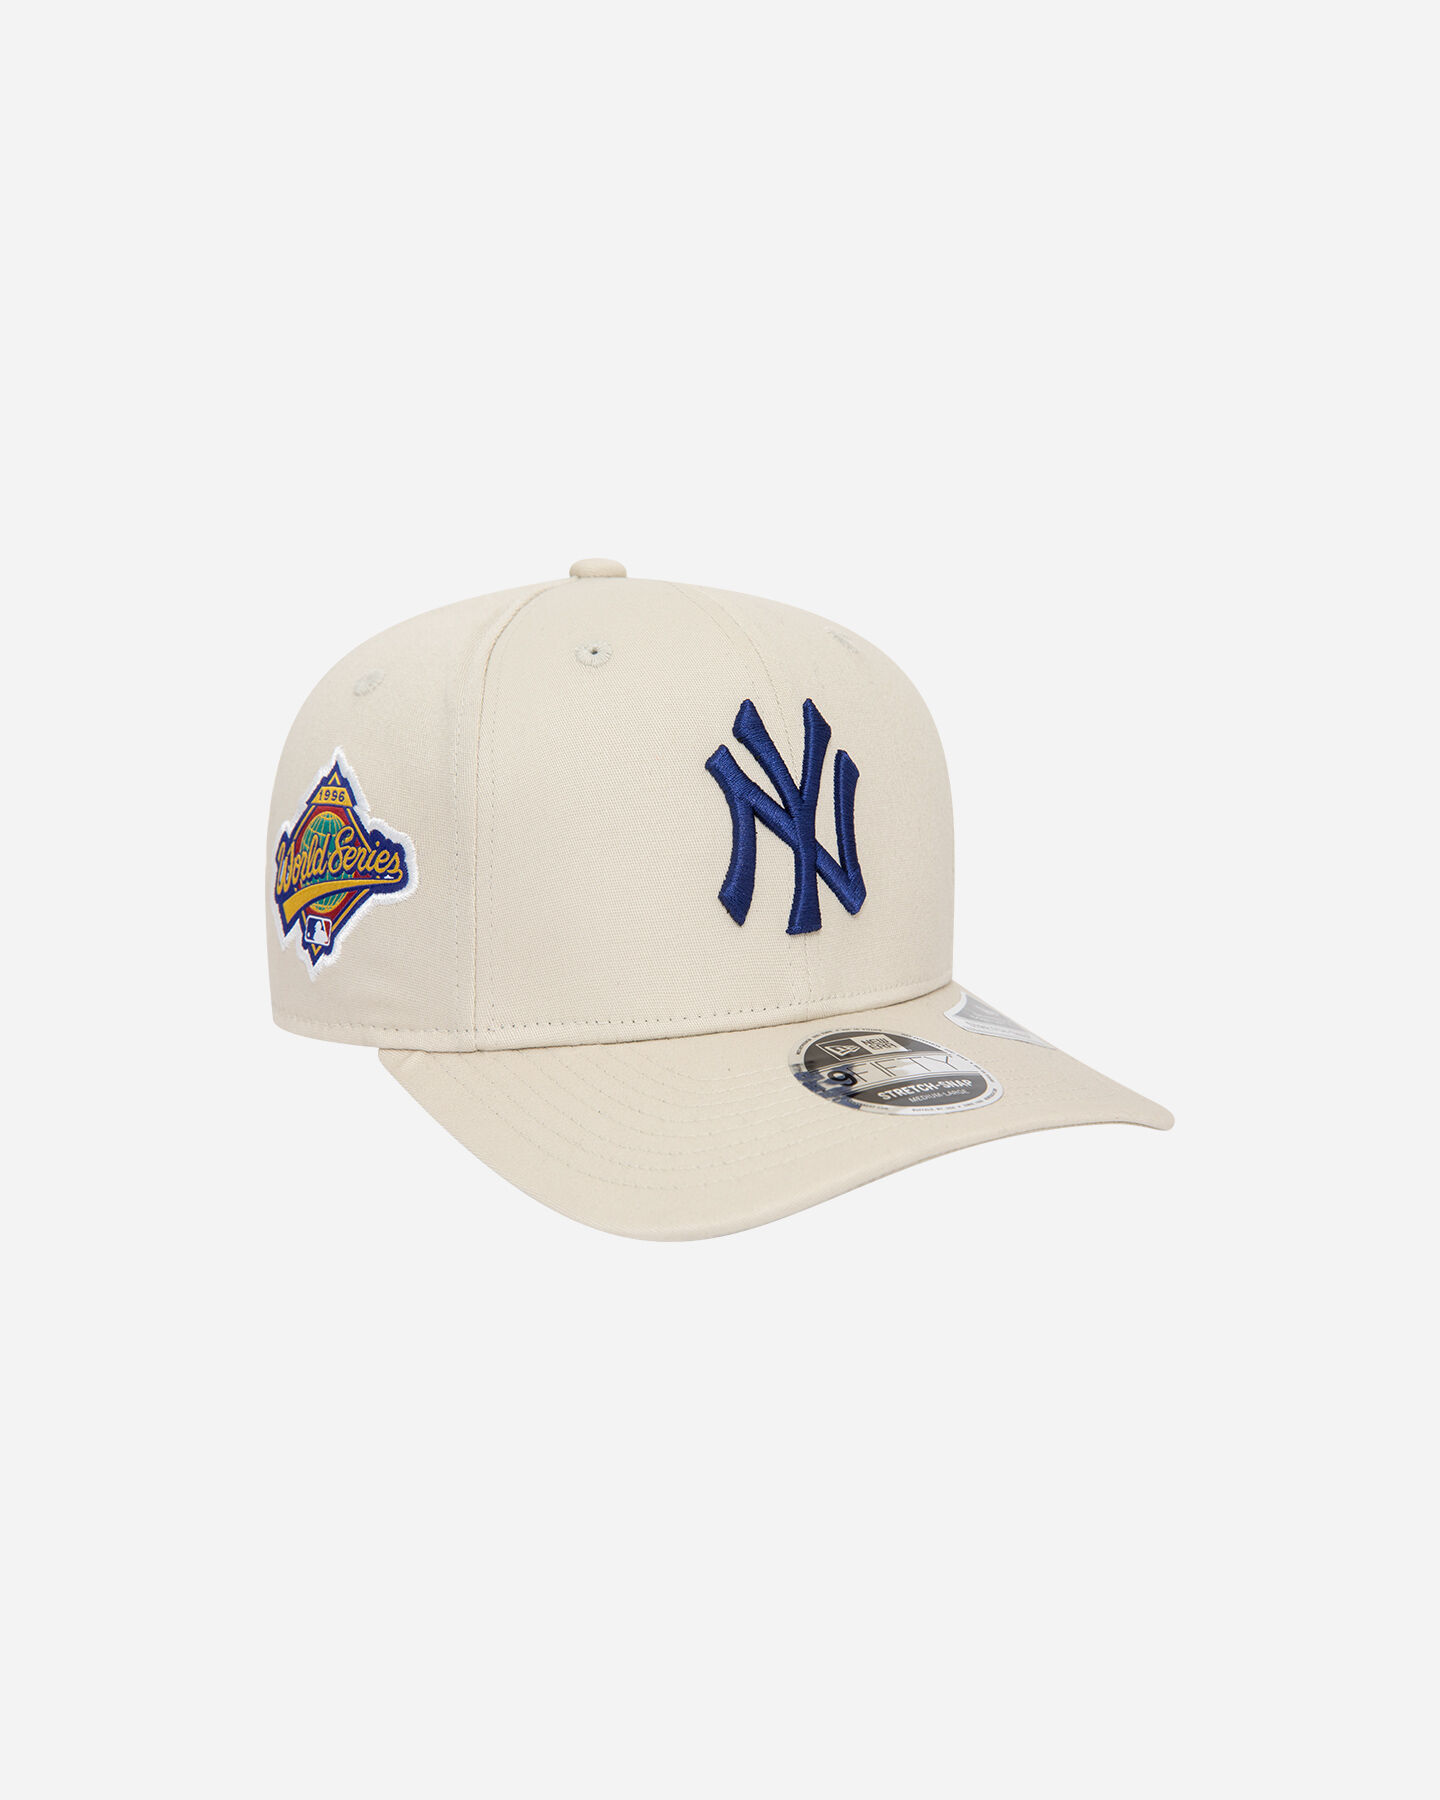  Cappellino NEW ERA 9FIFTY NEW YORK YANKEES M S5670976|270|SM scatto 2